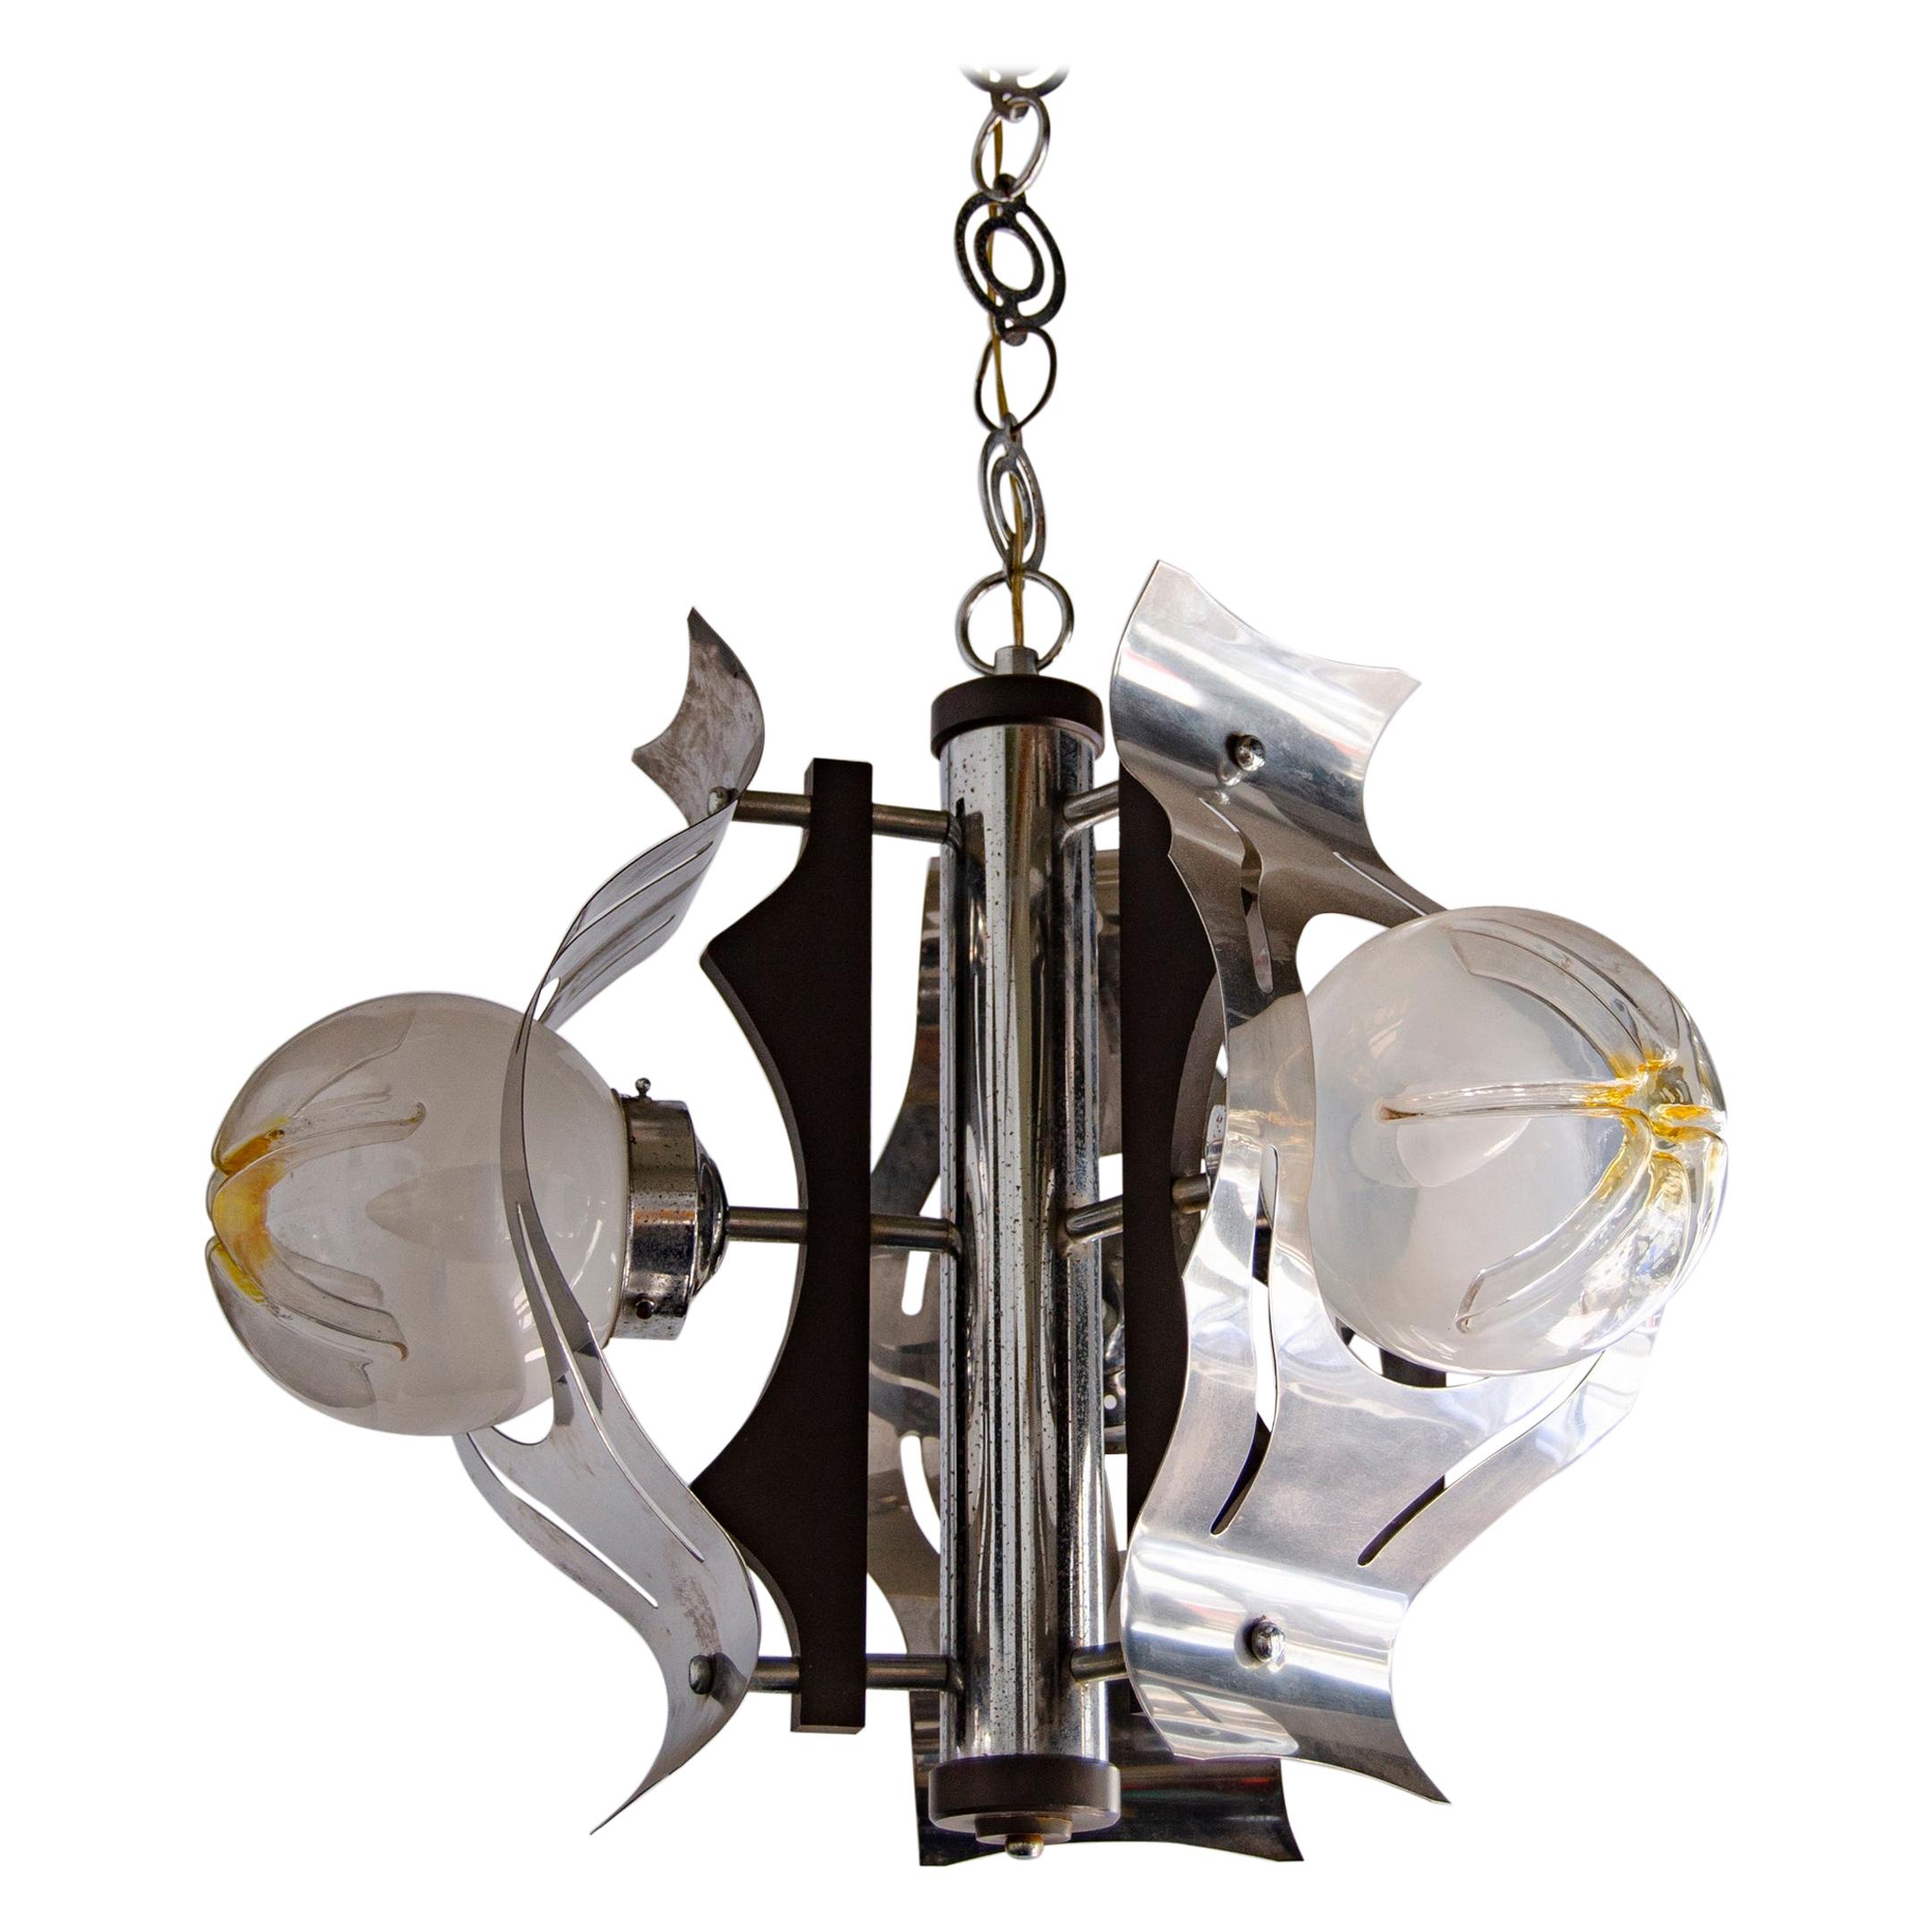 Italian Ceiling Lamp from the 1950s, Mazzega